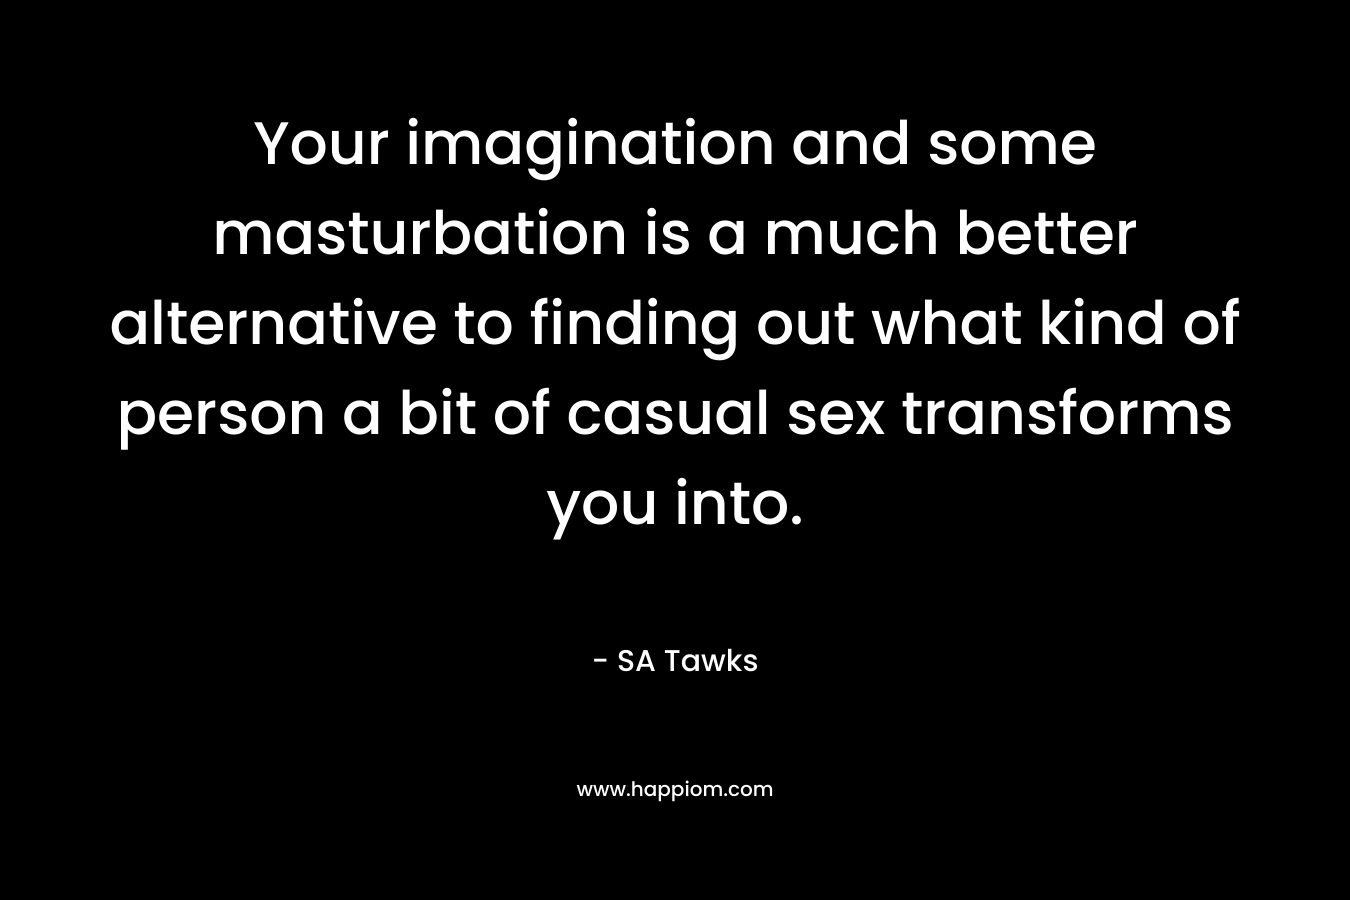 Your imagination and some masturbation is a much better alternative to finding out what kind of person a bit of casual sex transforms you into. – SA Tawks